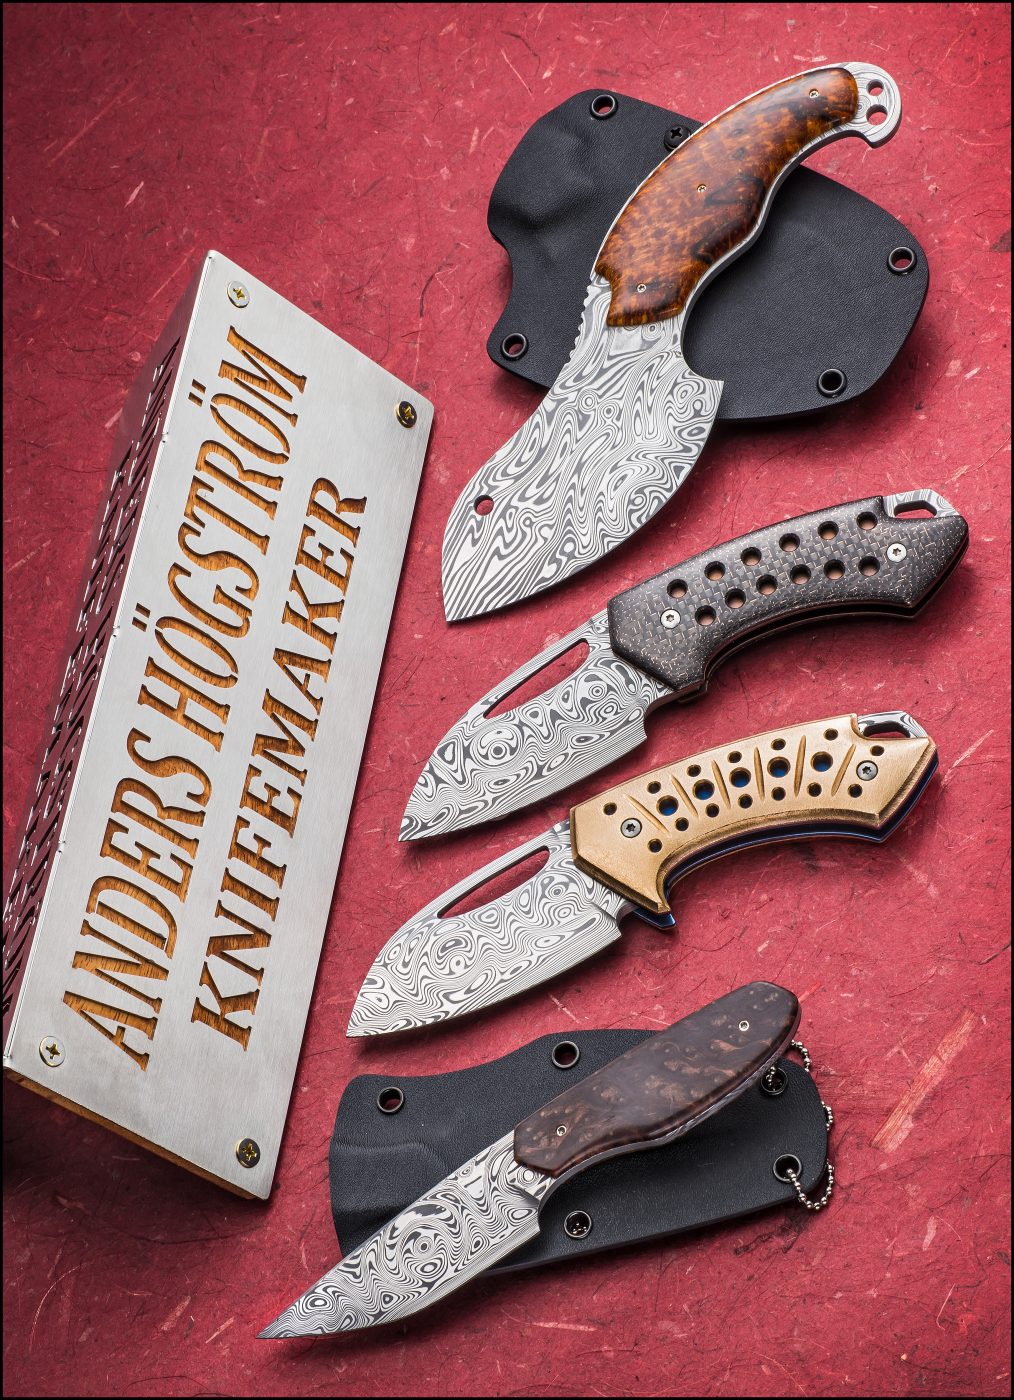 Blade Show Knives from 2014 by Anders Högström